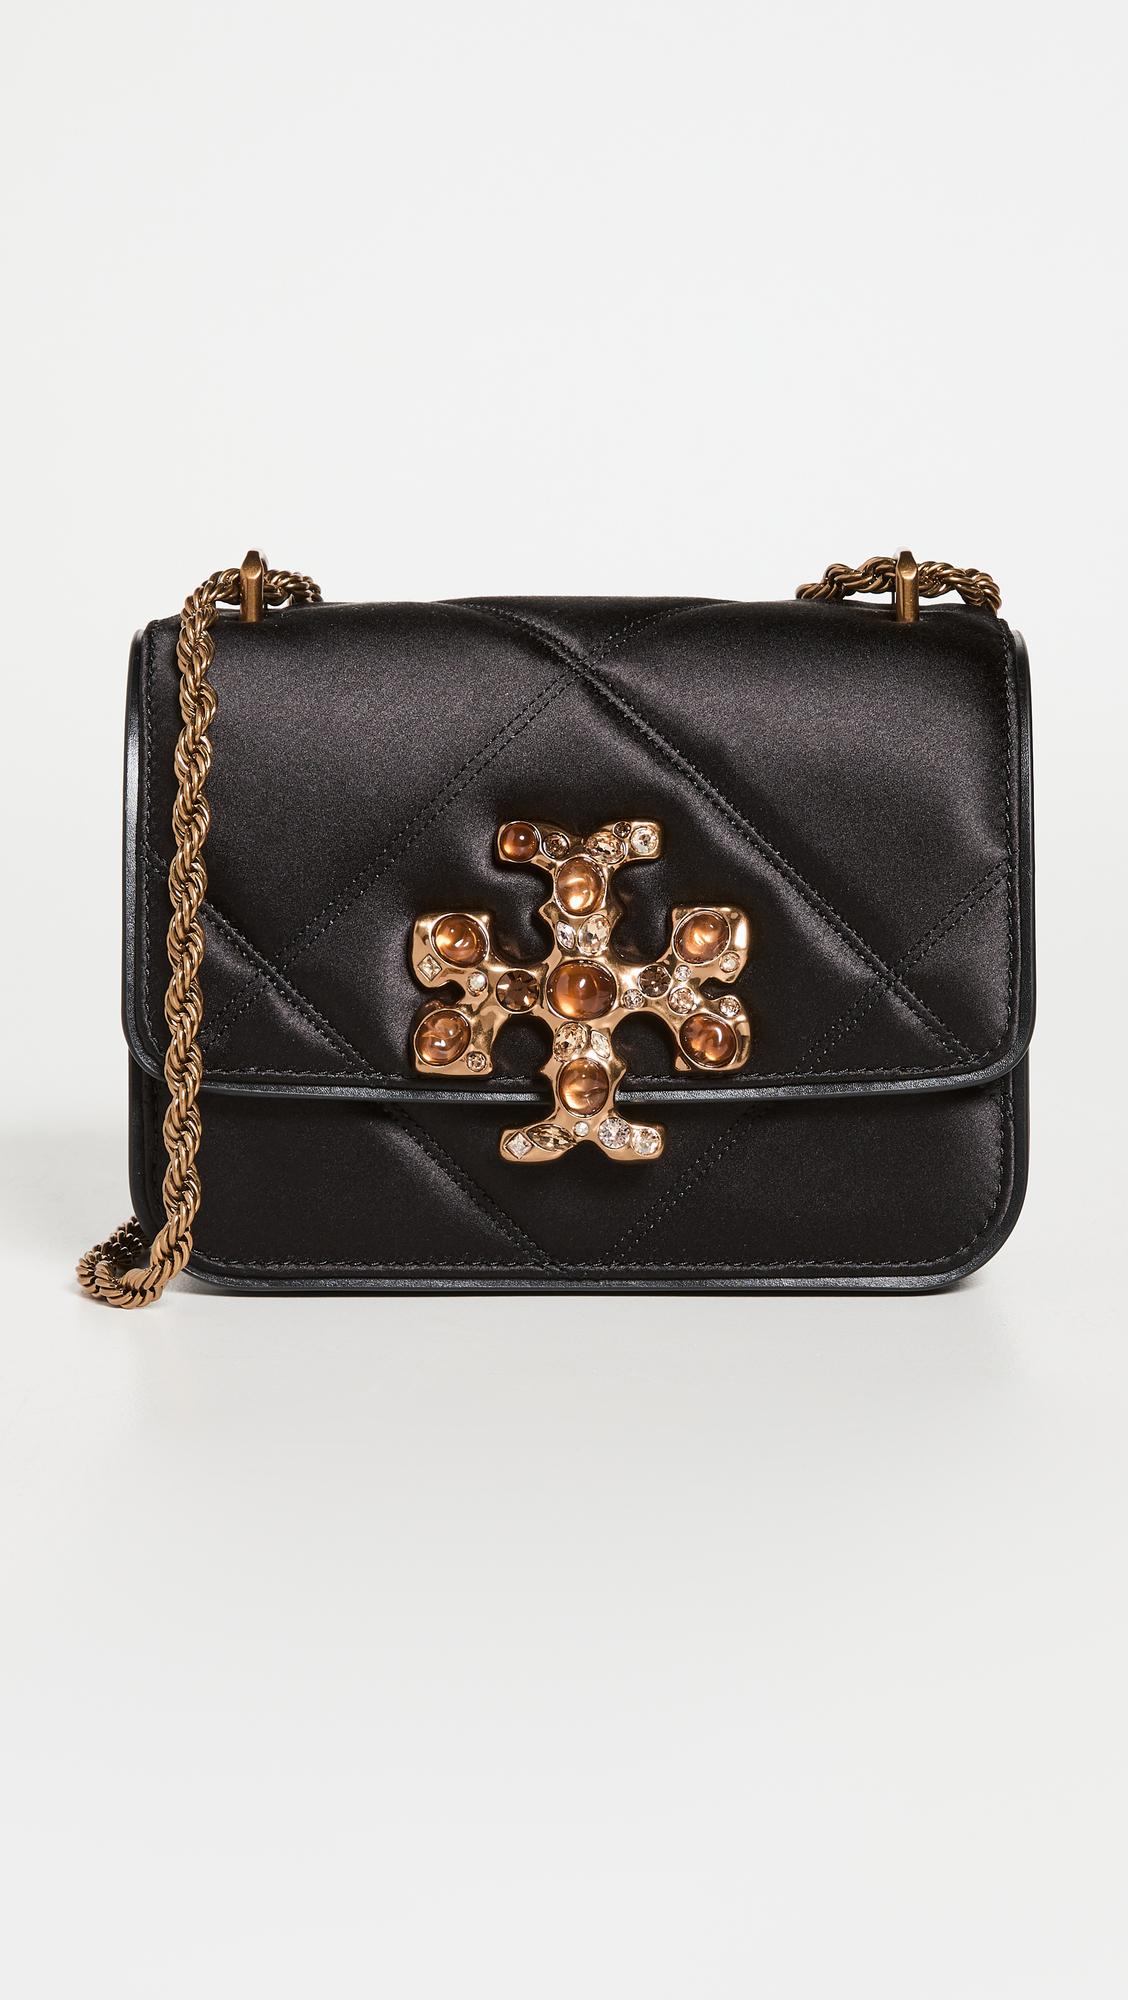 Tory Burch Eleanor Satin Small Convertible Shoulder Bag in Black | Lyst